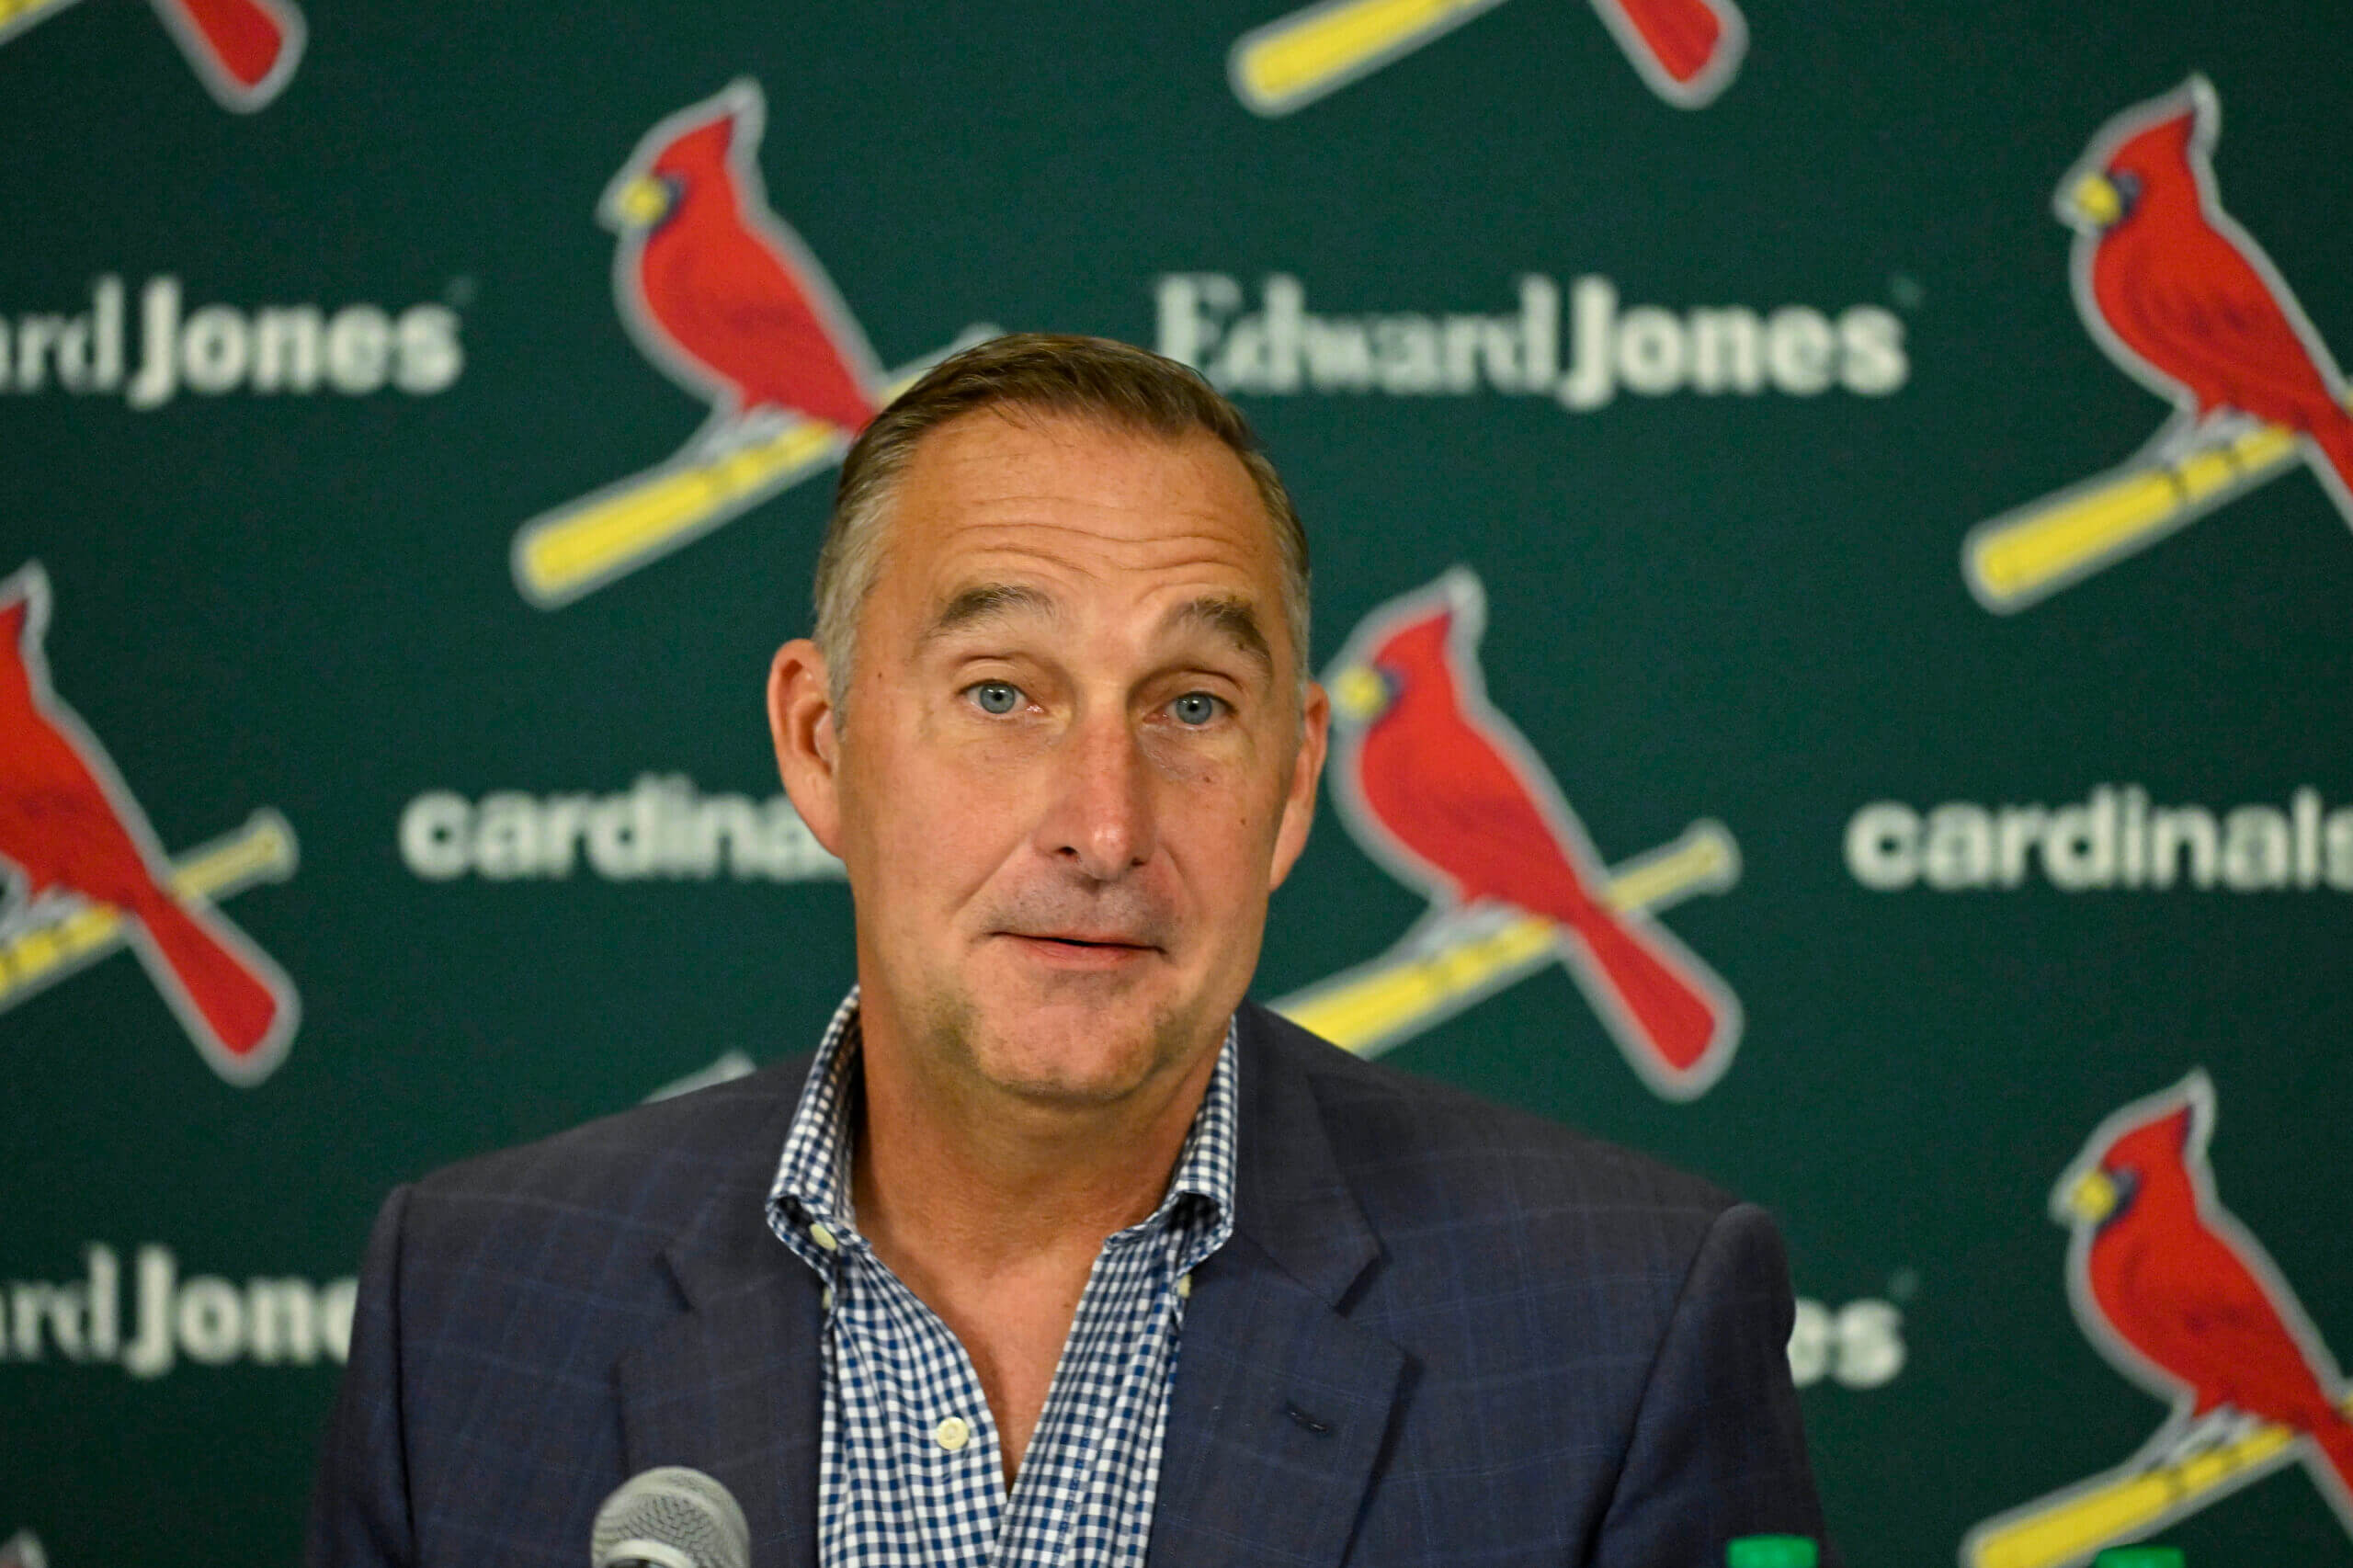  Q&A: Cardinals executive John Mozeliak talks Opening Day roster, pressure to win in 2024 